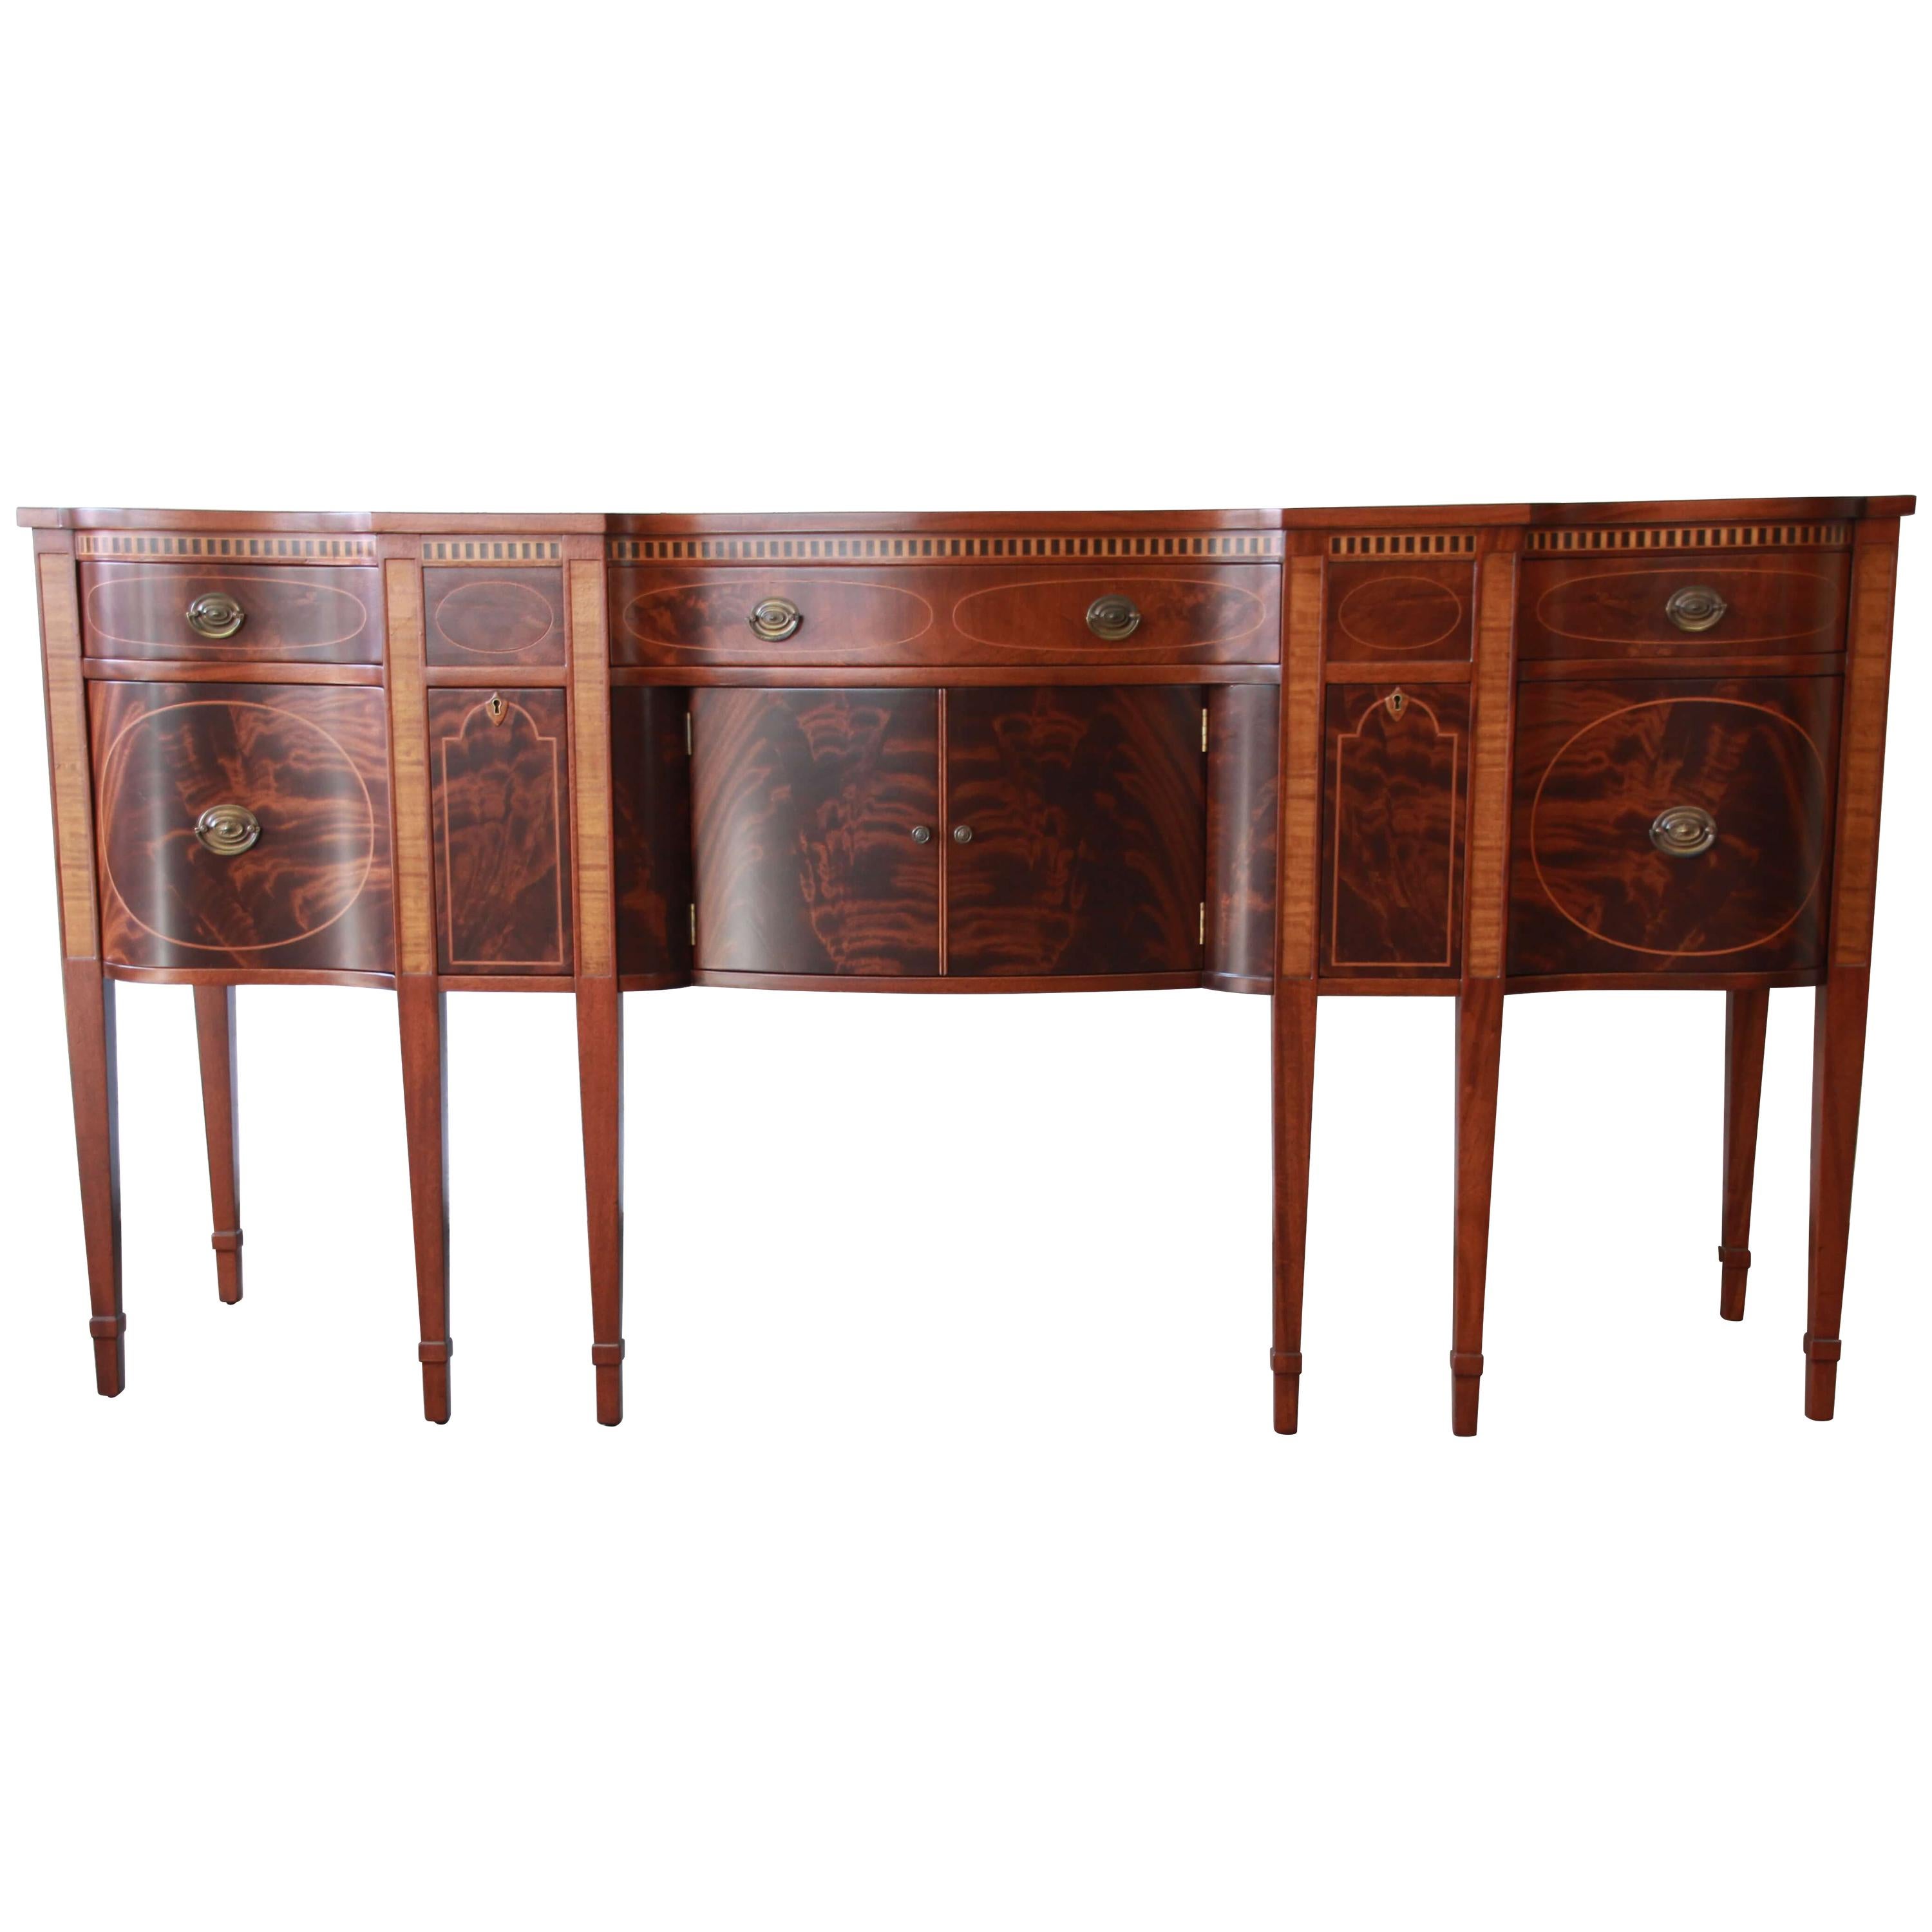 Romweber Antique Inlaid Flame Mahogany Sideboard Buffet